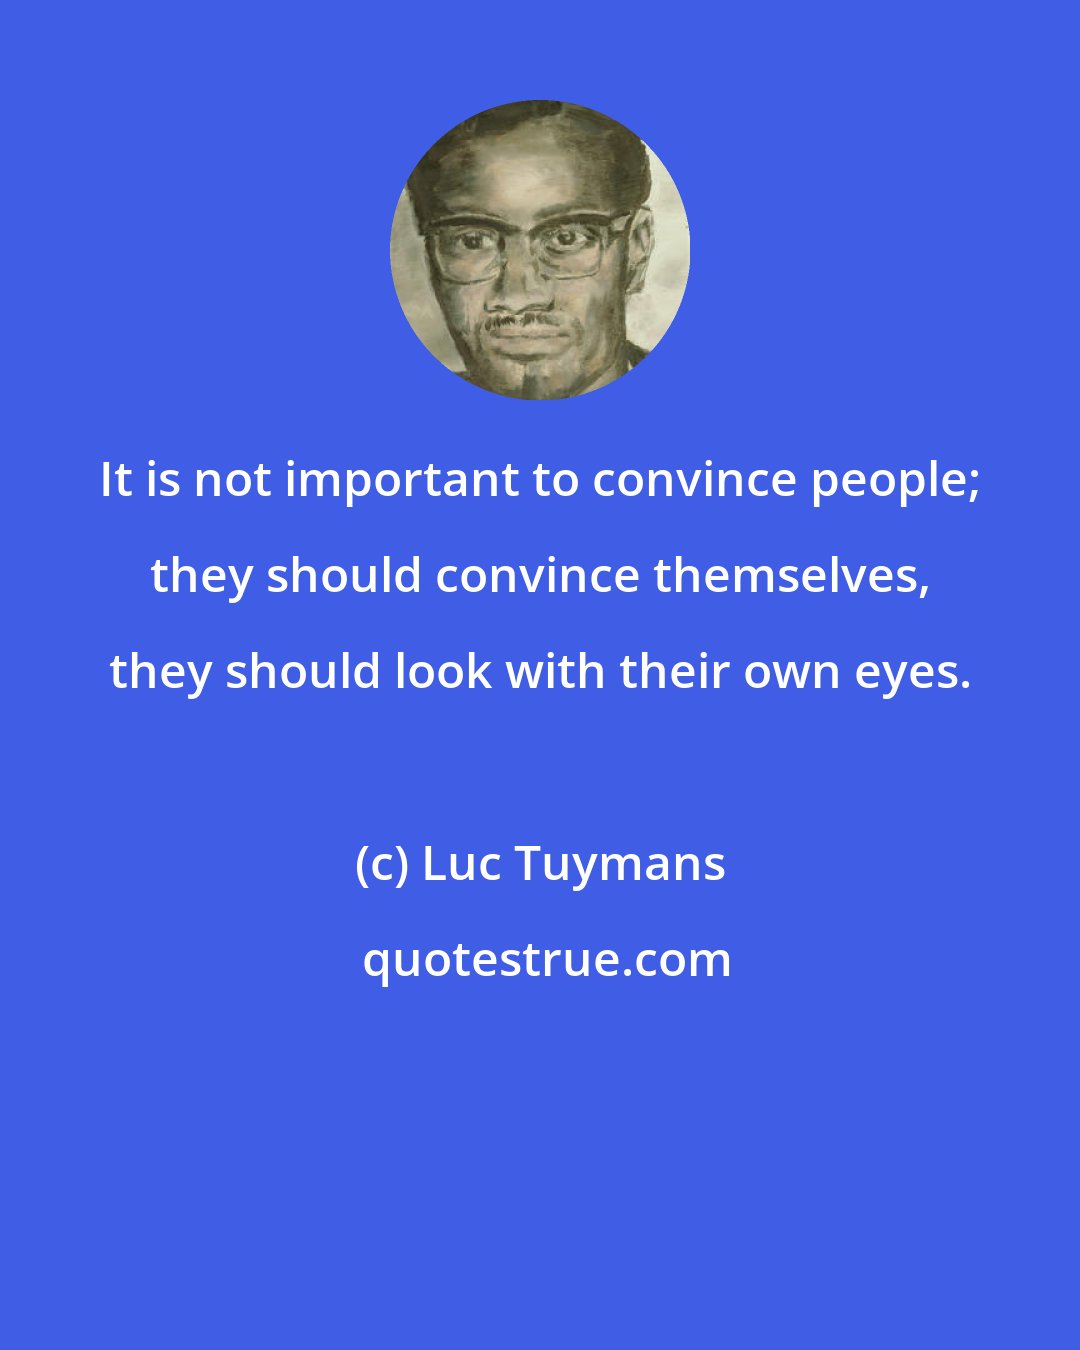 Luc Tuymans: It is not important to convince people; they should convince themselves, they should look with their own eyes.